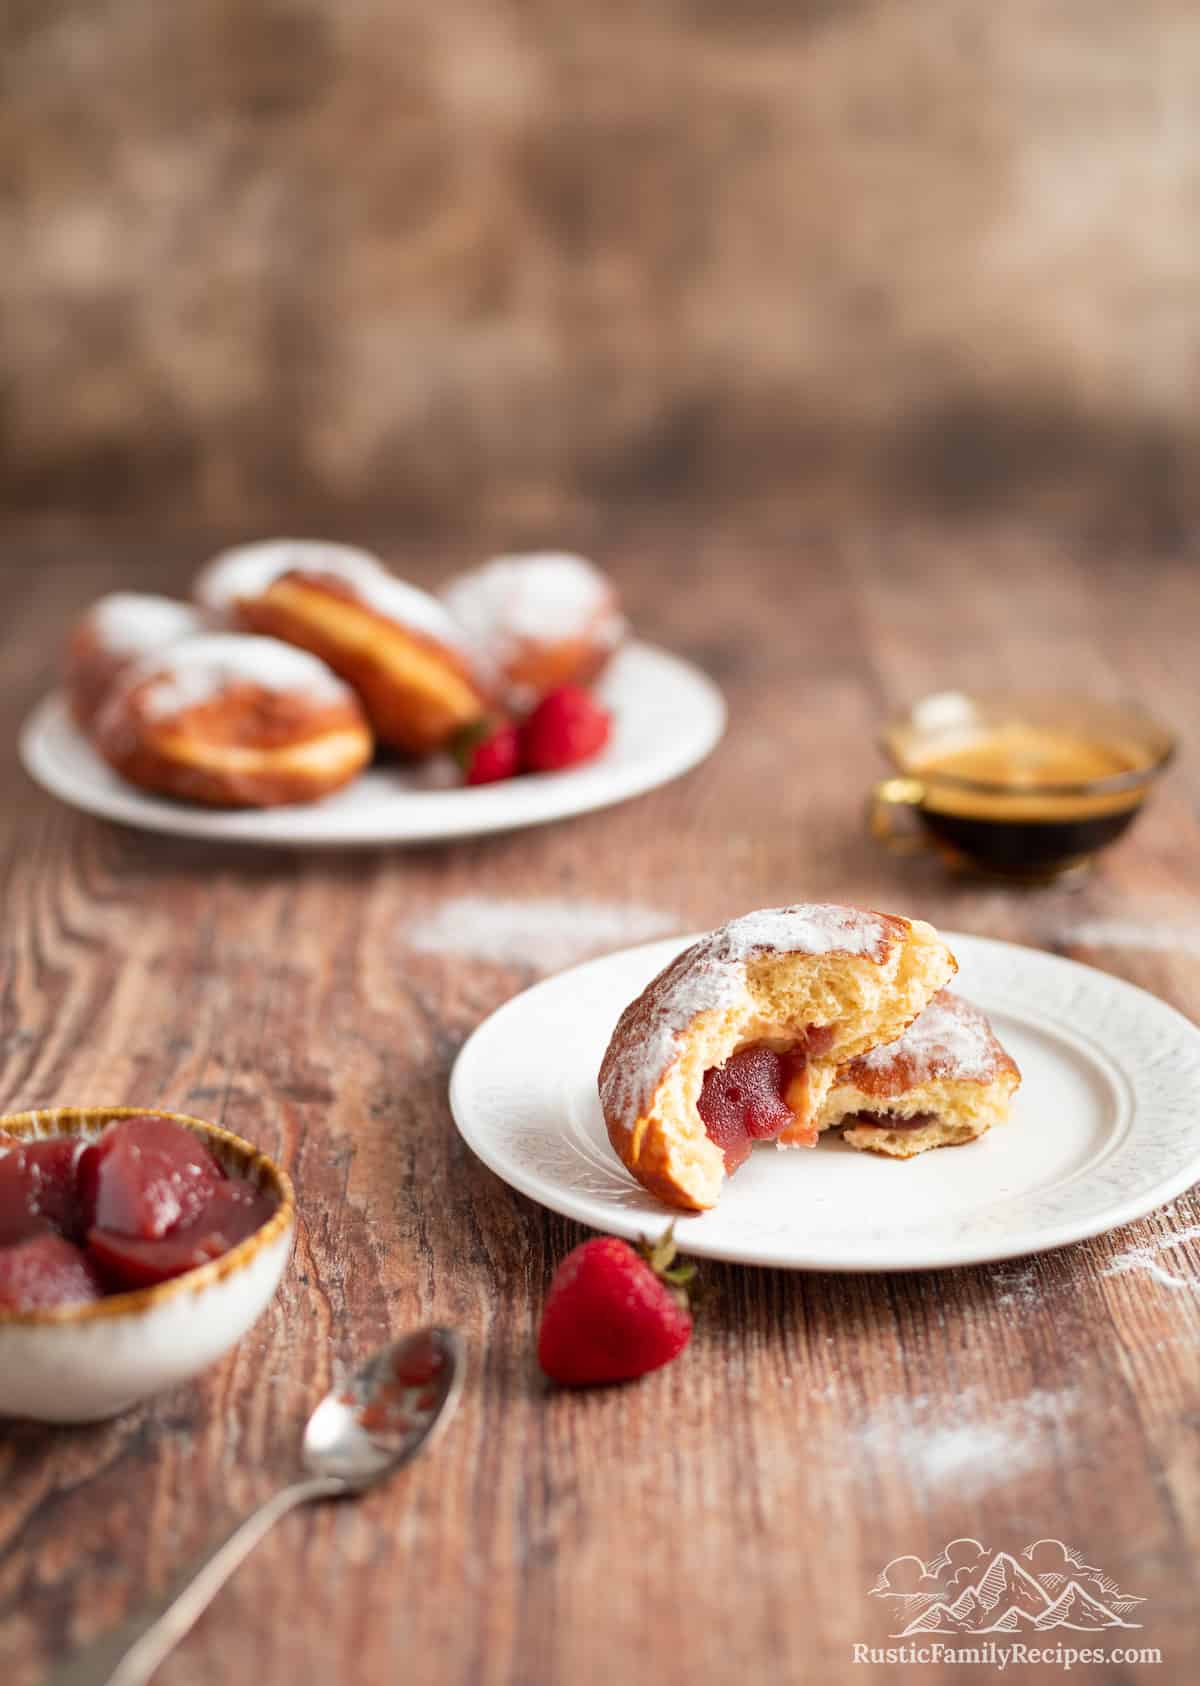 A paczki with strawberry filling on a plate cut in half